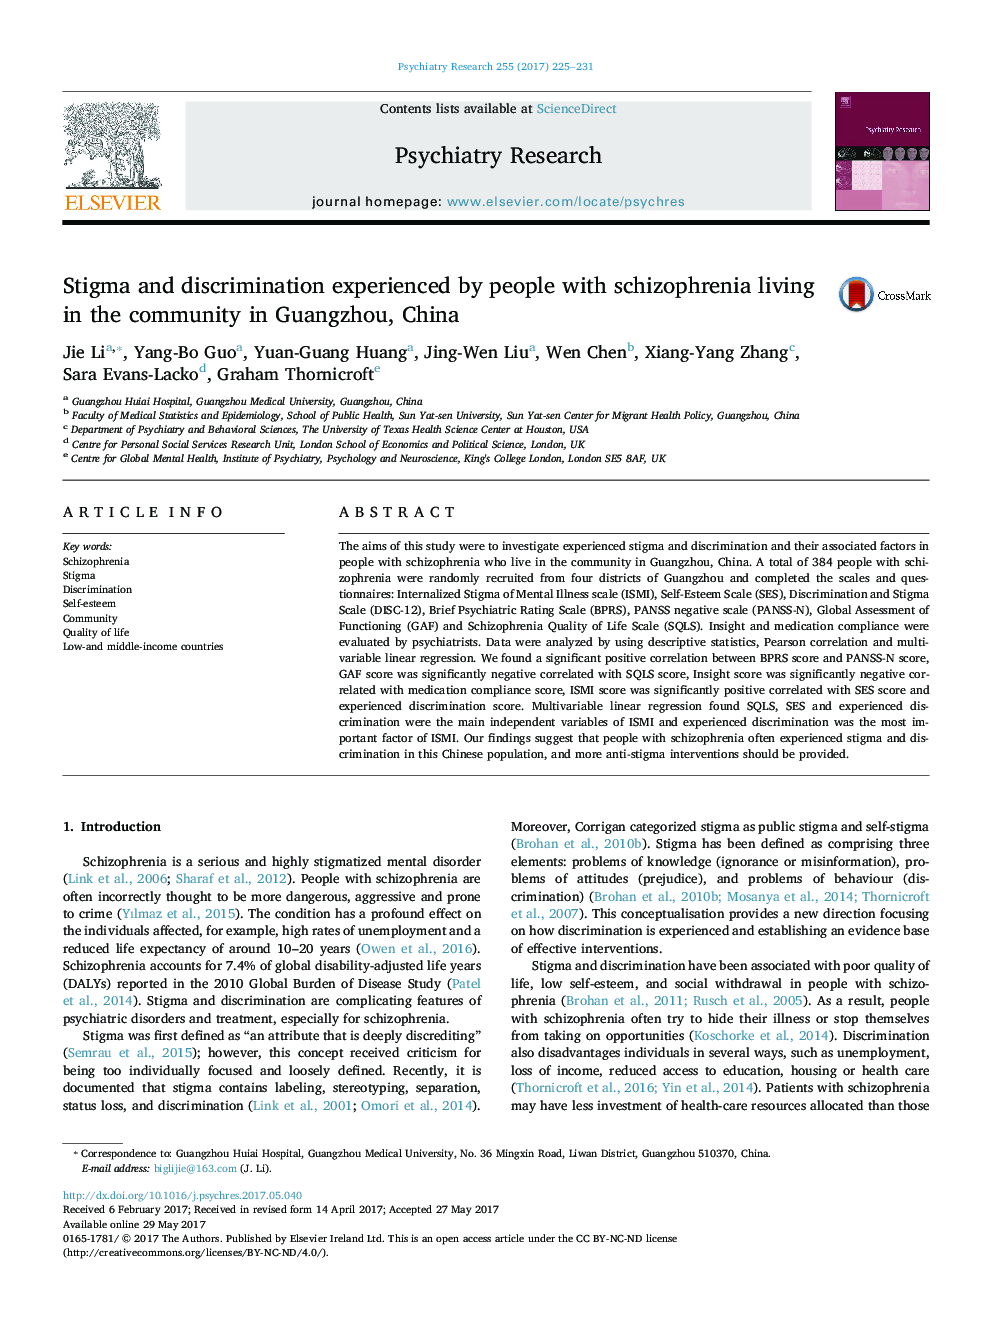 Stigma and discrimination experienced by people with schizophrenia living in the community in Guangzhou, China